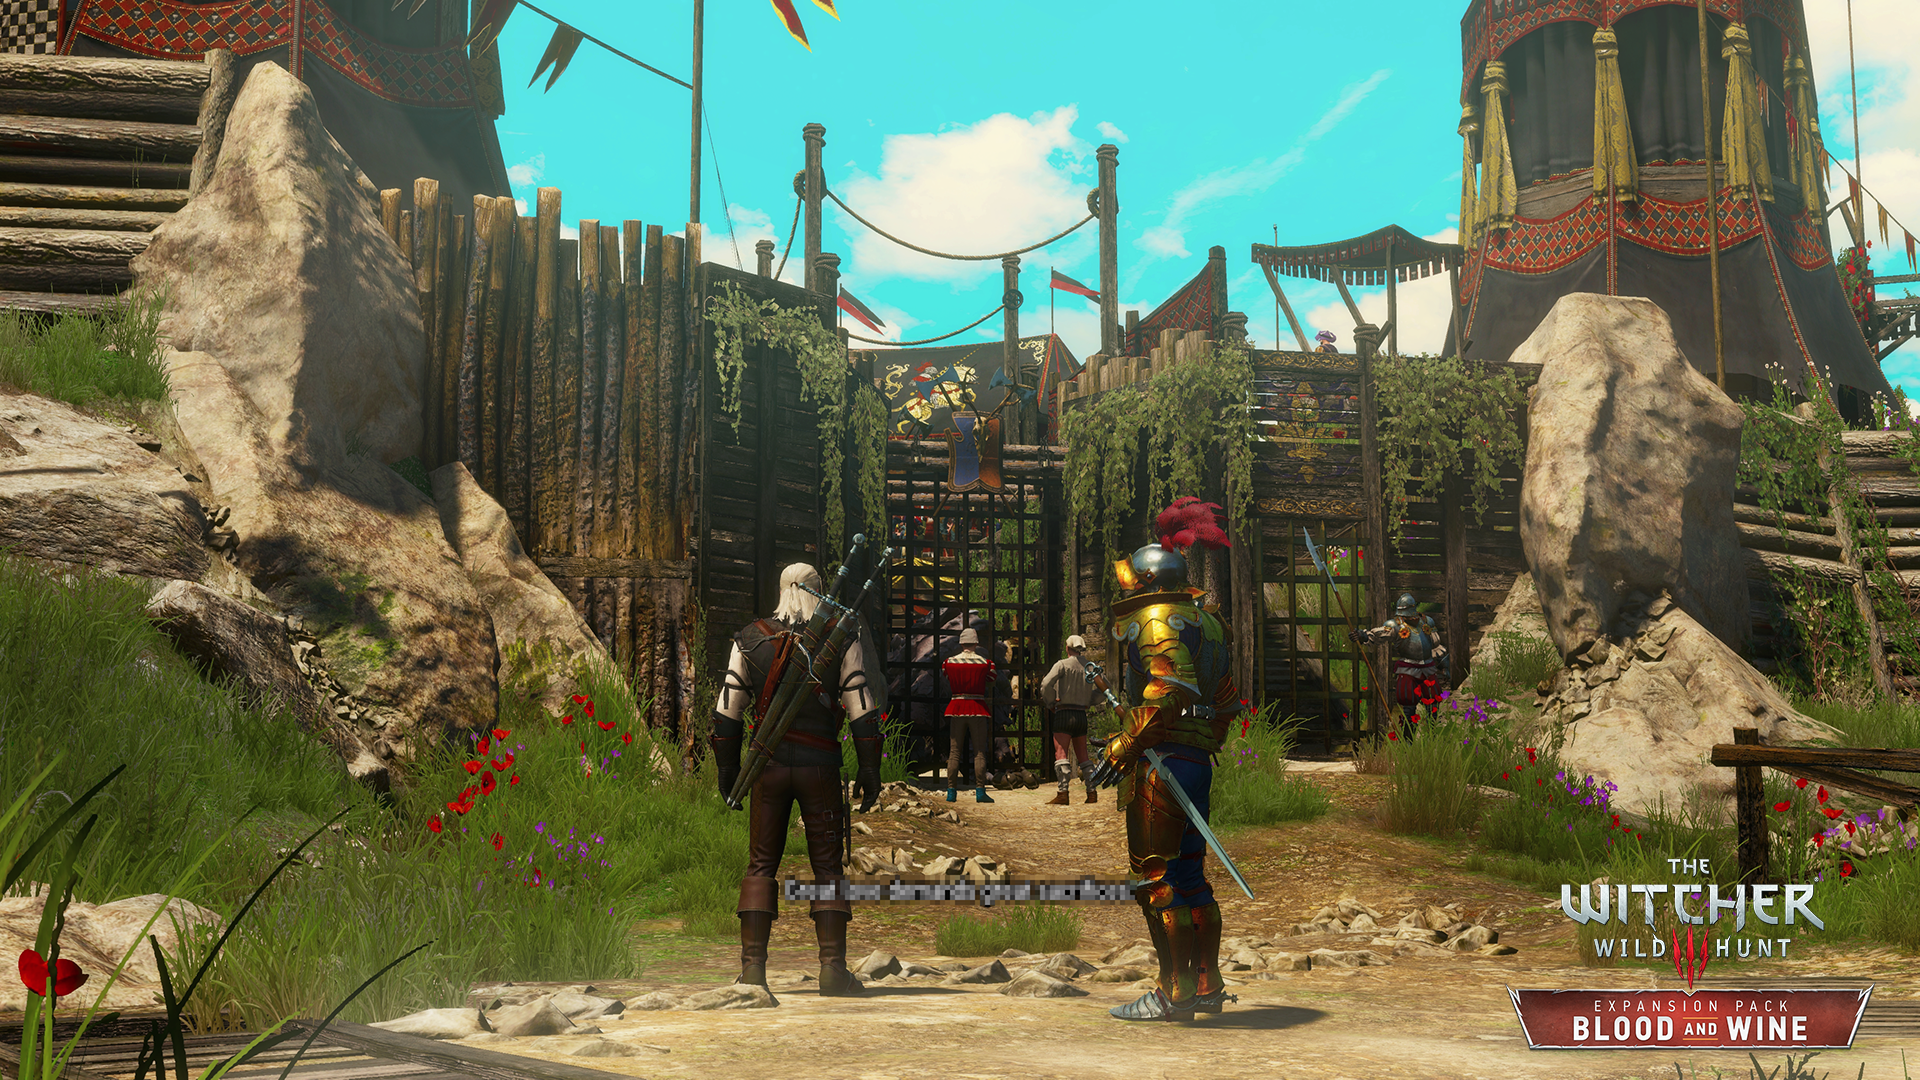 Media asset in full size related to 3dfxzone.it news item entitled as follows: Nuovi screenshot del DLC Blood and Wine di The Witcher 3: Wild Hunt | Image Name: news24302_The-Witcher-3-Wild-Hunt-Blood-and-Wine-Screenshot_6.png